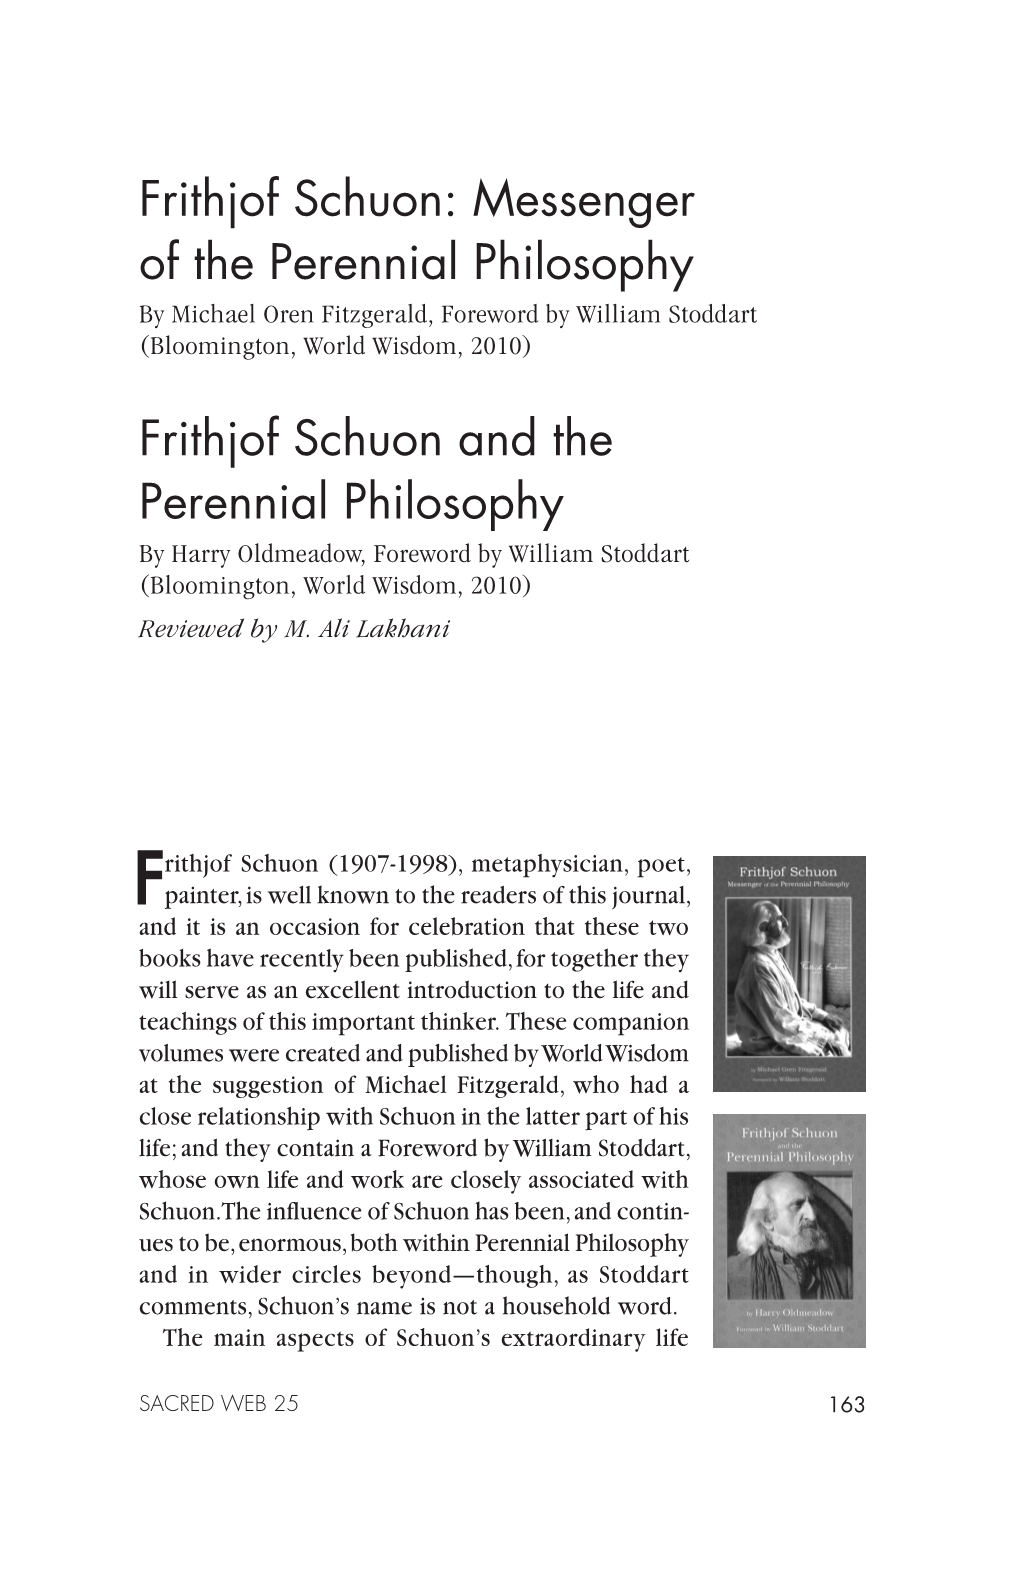 Frithjof Schuon: Messenger of the Perennial Philosophy by Michael Oren Fitzgerald, Foreword by William Stoddart (Bloomington, World Wisdom, 2010)